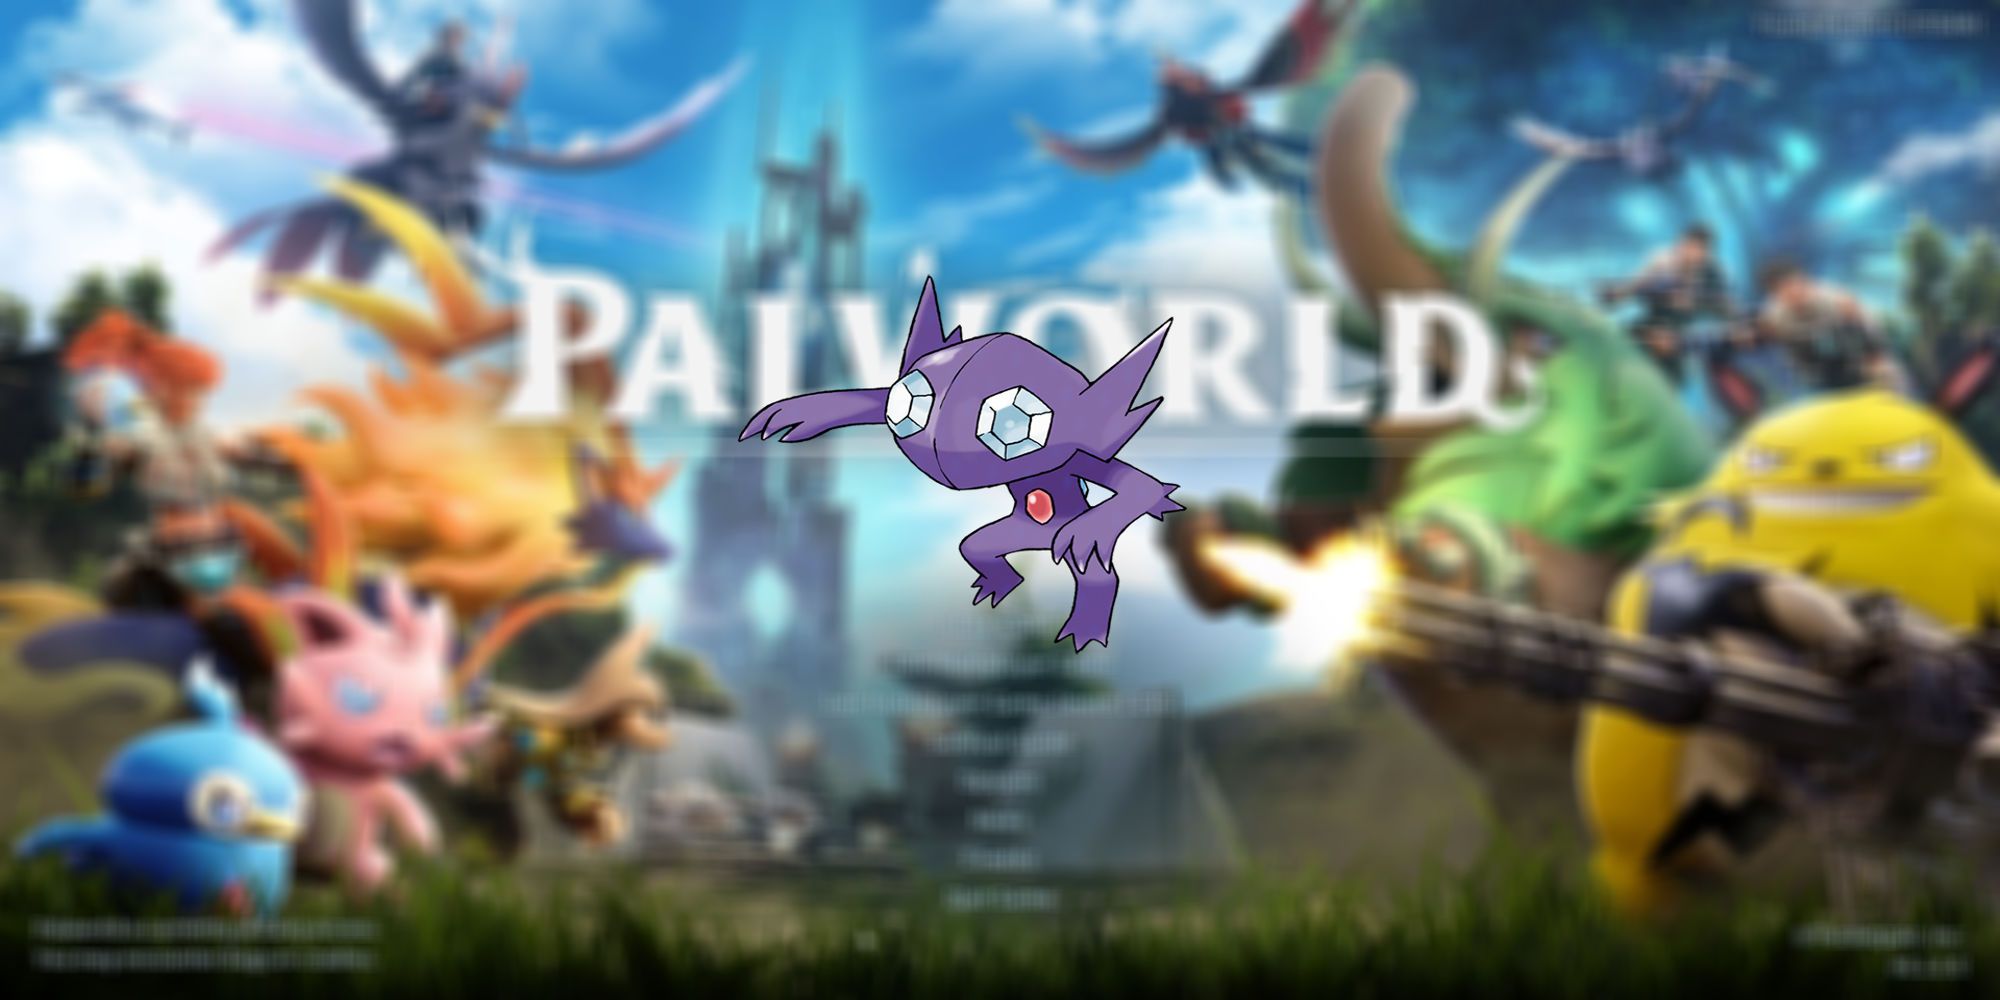 Sableye from Pokemon potentially fitting in Palworld